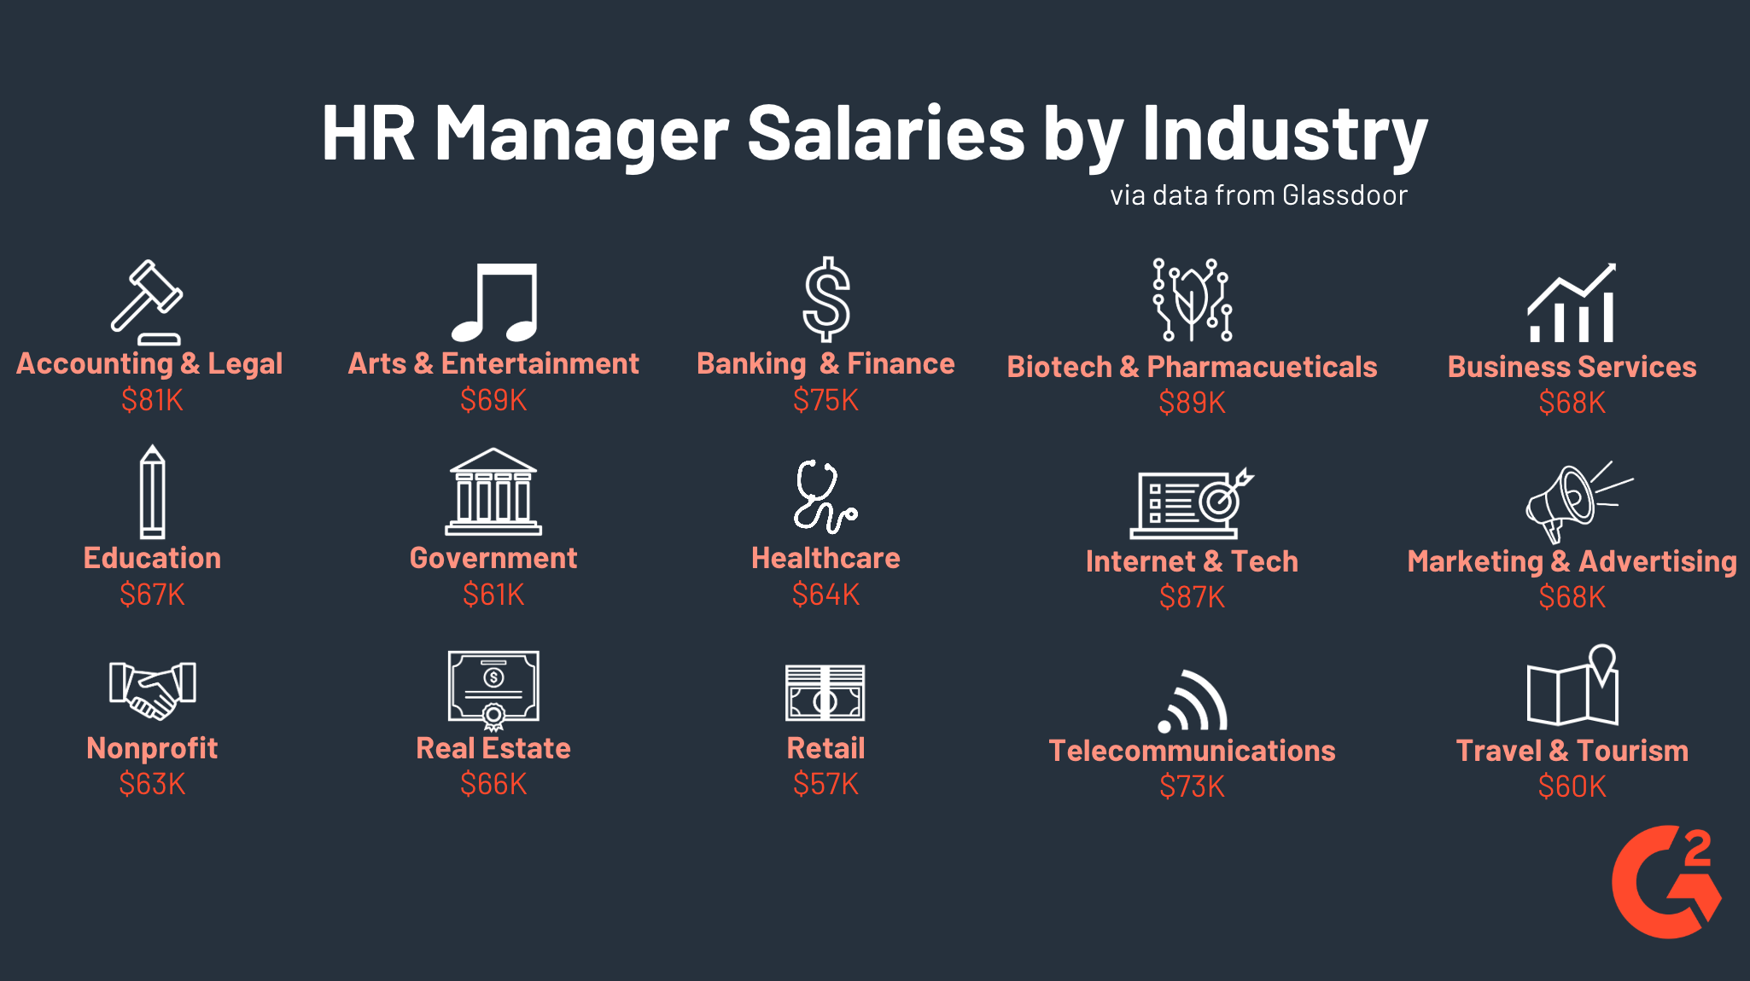 State of HR Manager Salary Ranges in 2019